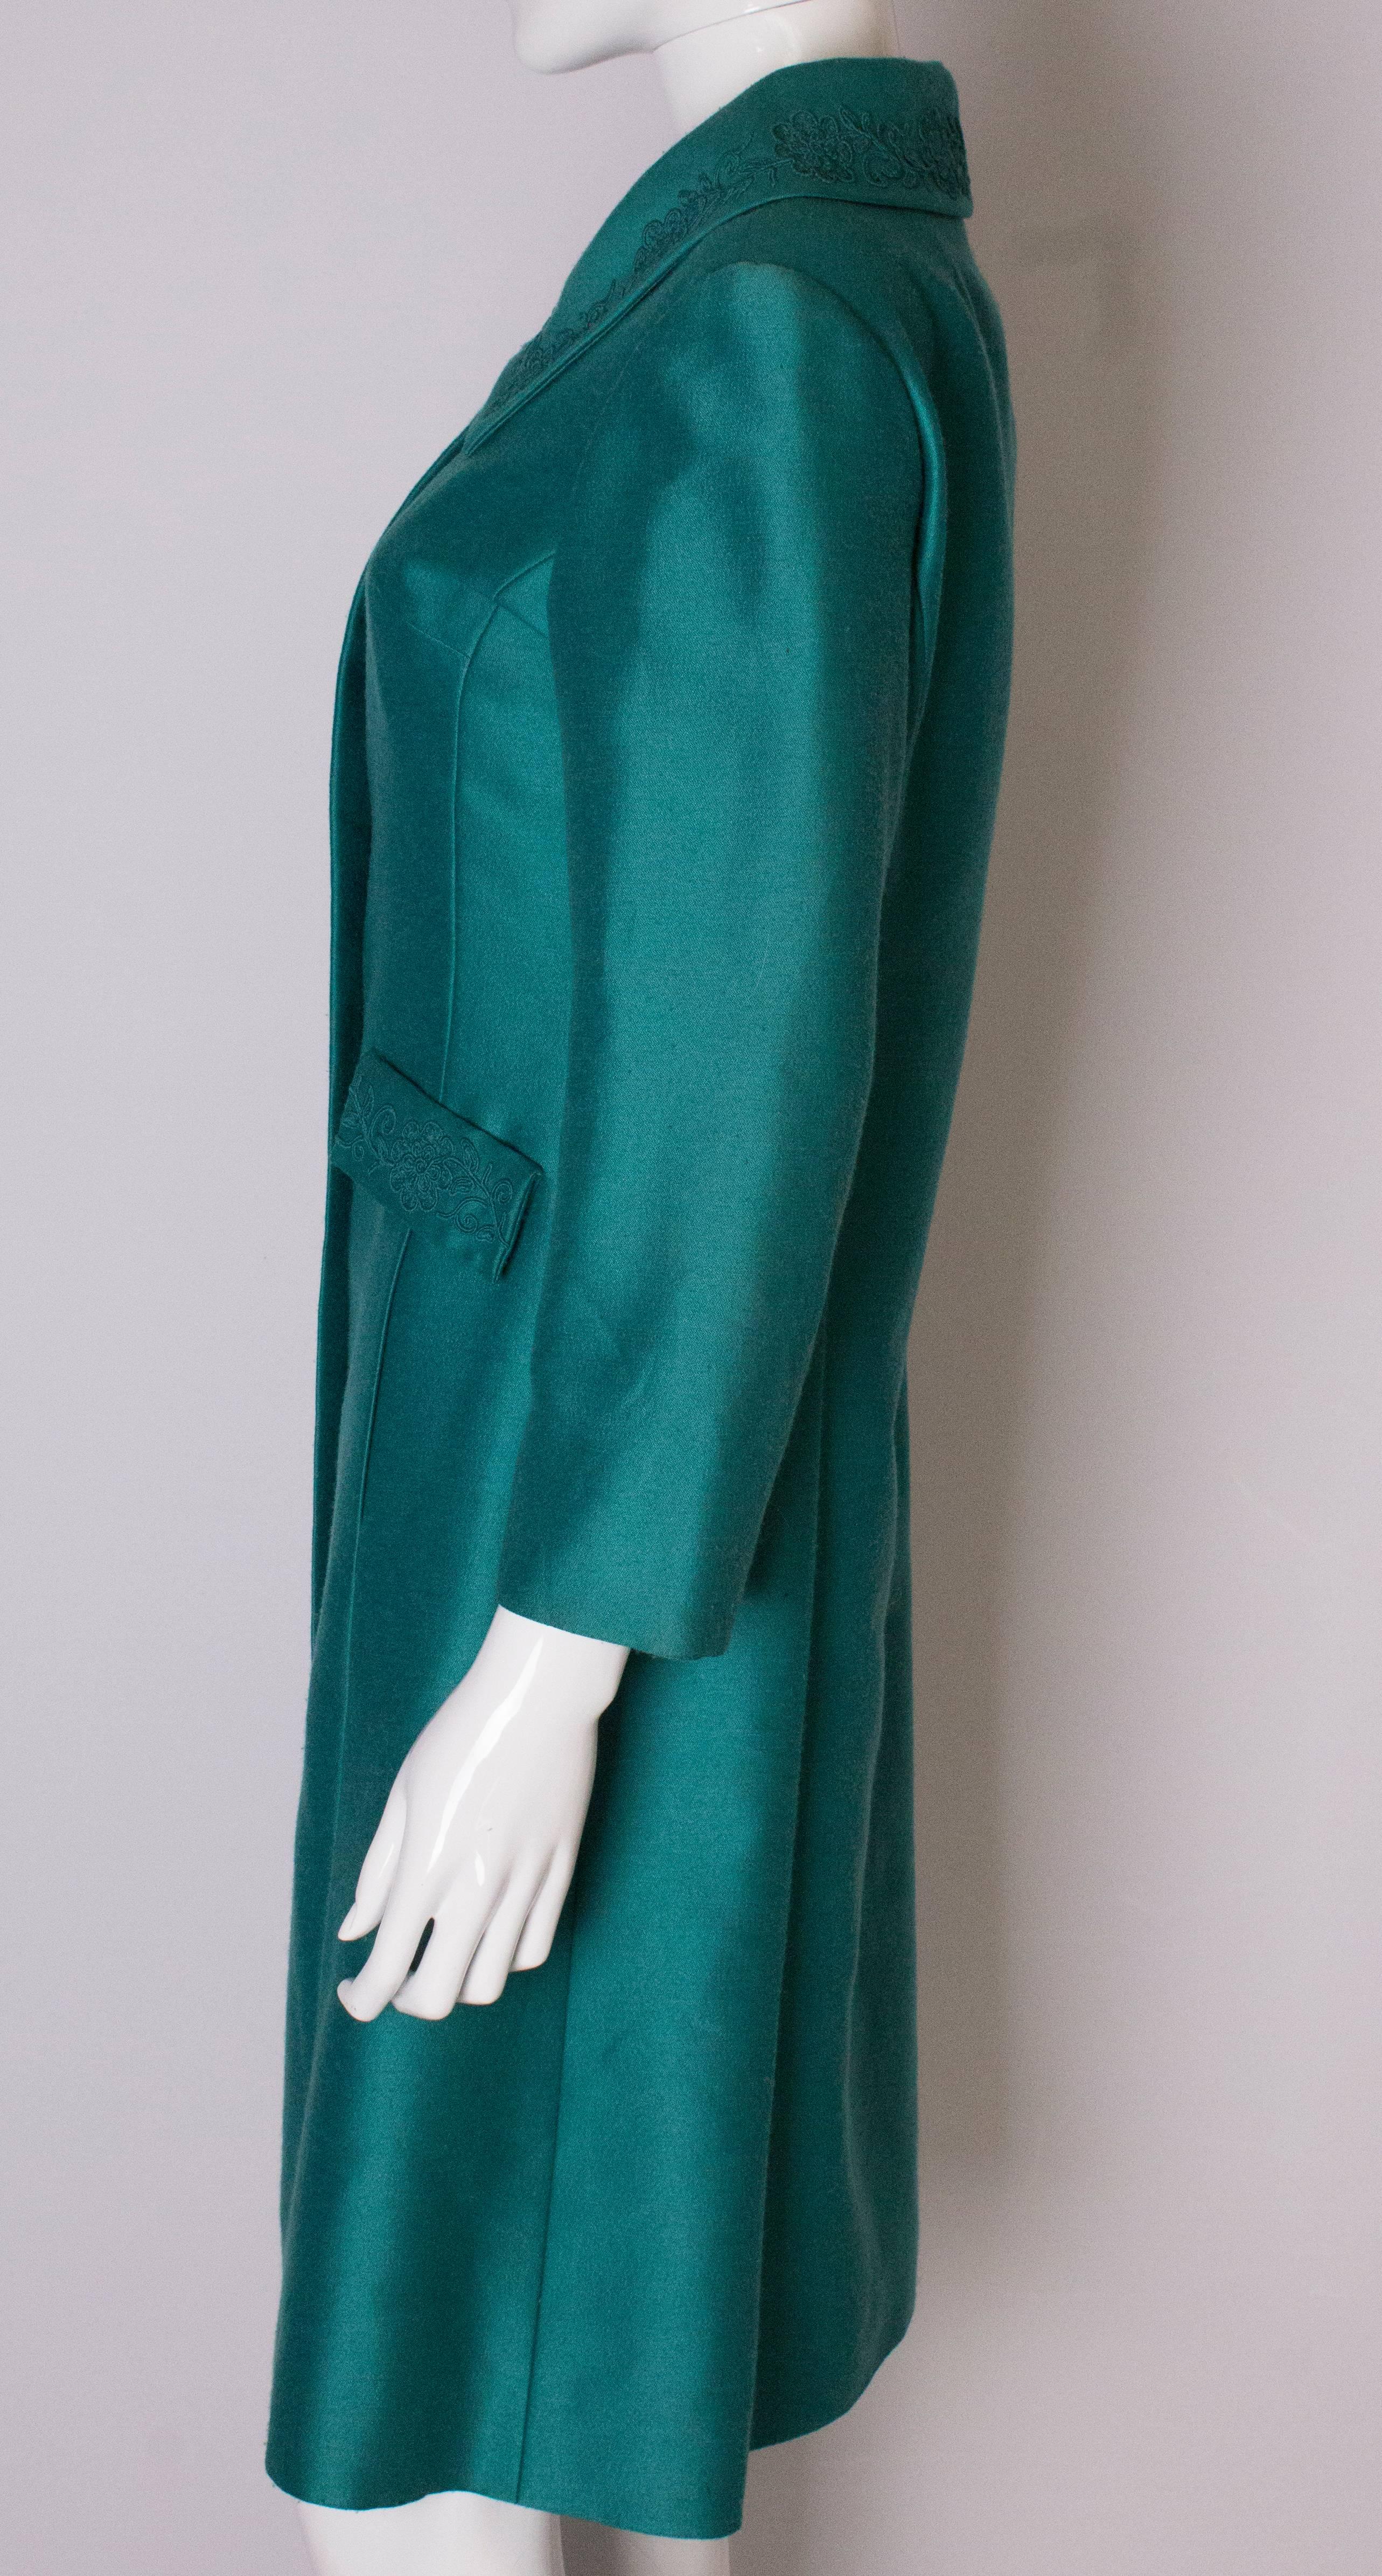 A Vintage 1960s Teal Coloured Evening Coat In Good Condition For Sale In London, GB